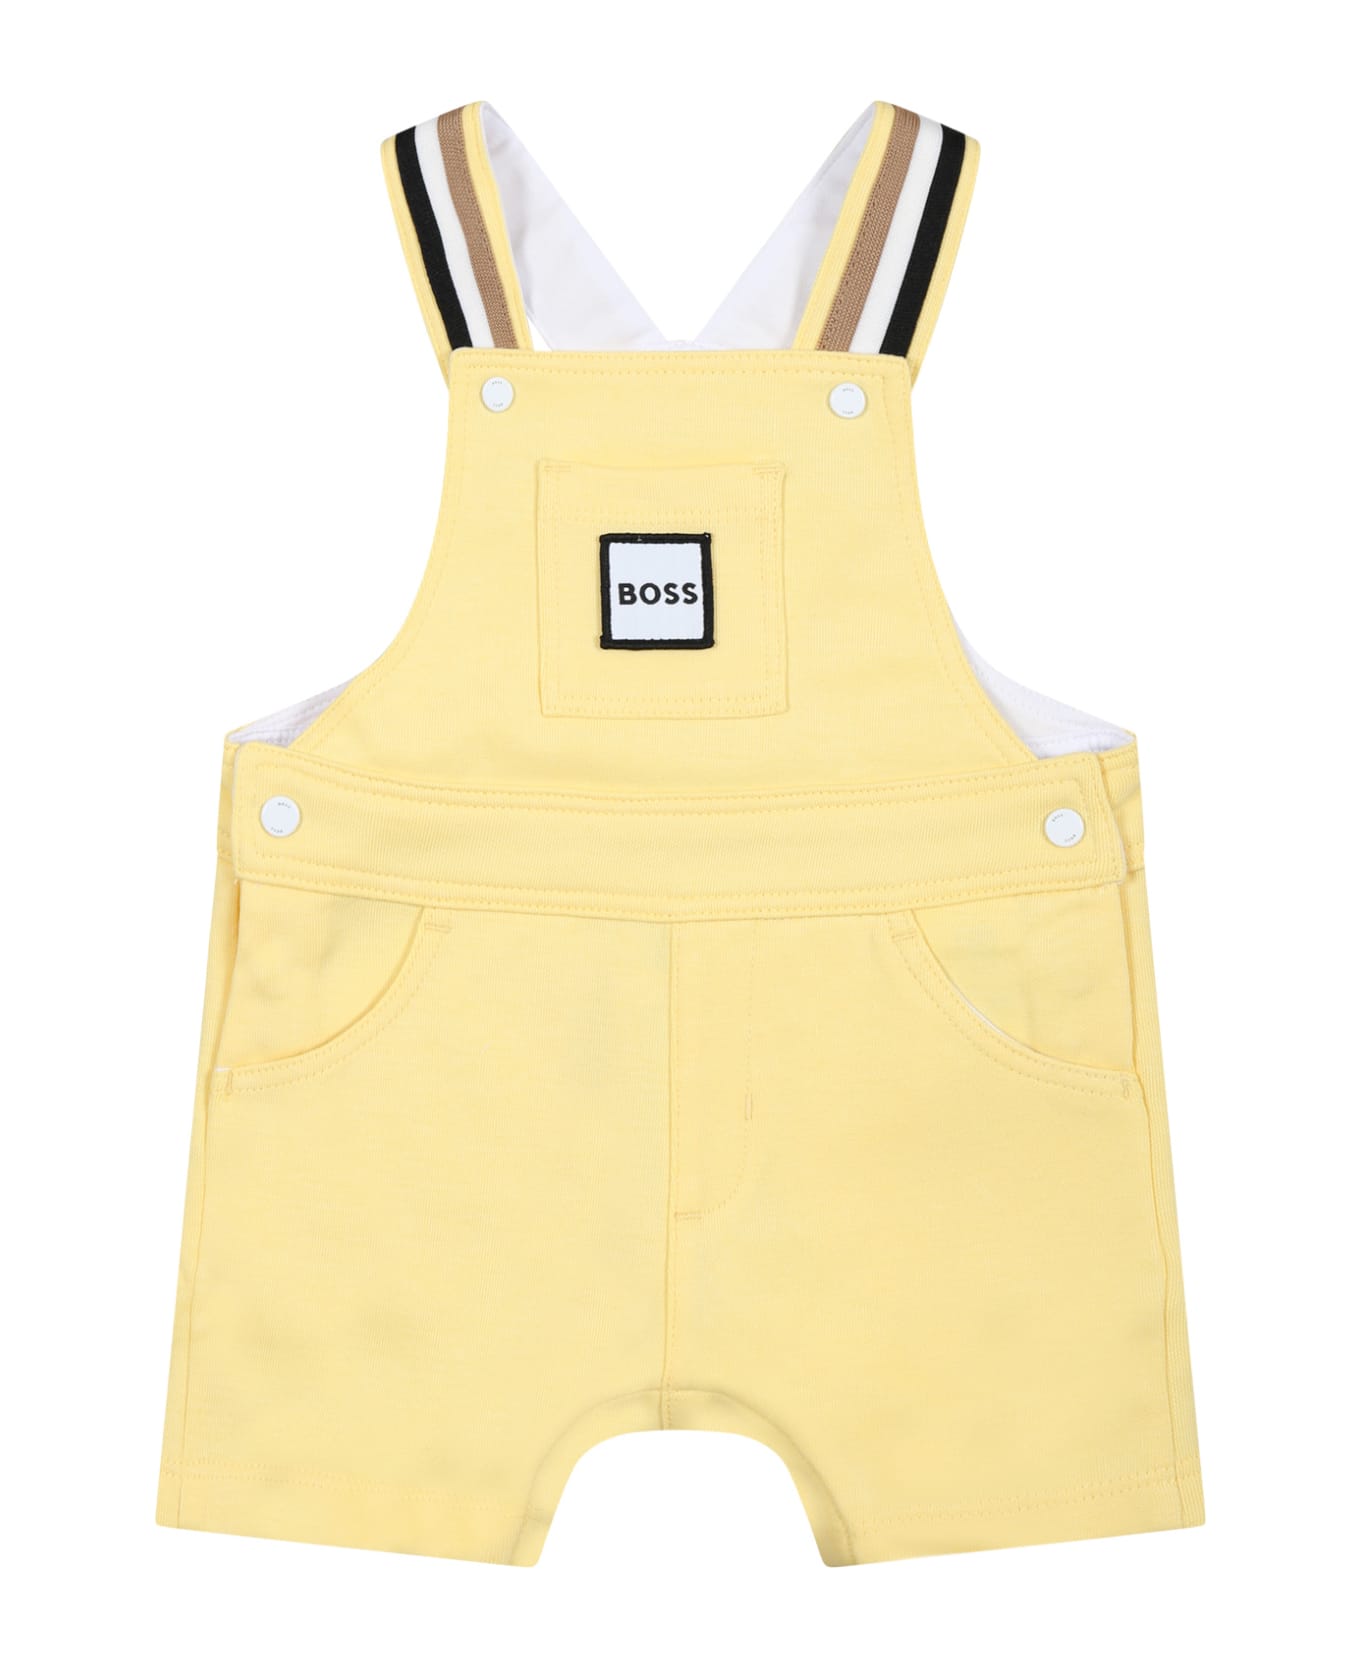 Hugo Boss Multicolor Set For Baby Boy With Logo - Yellow